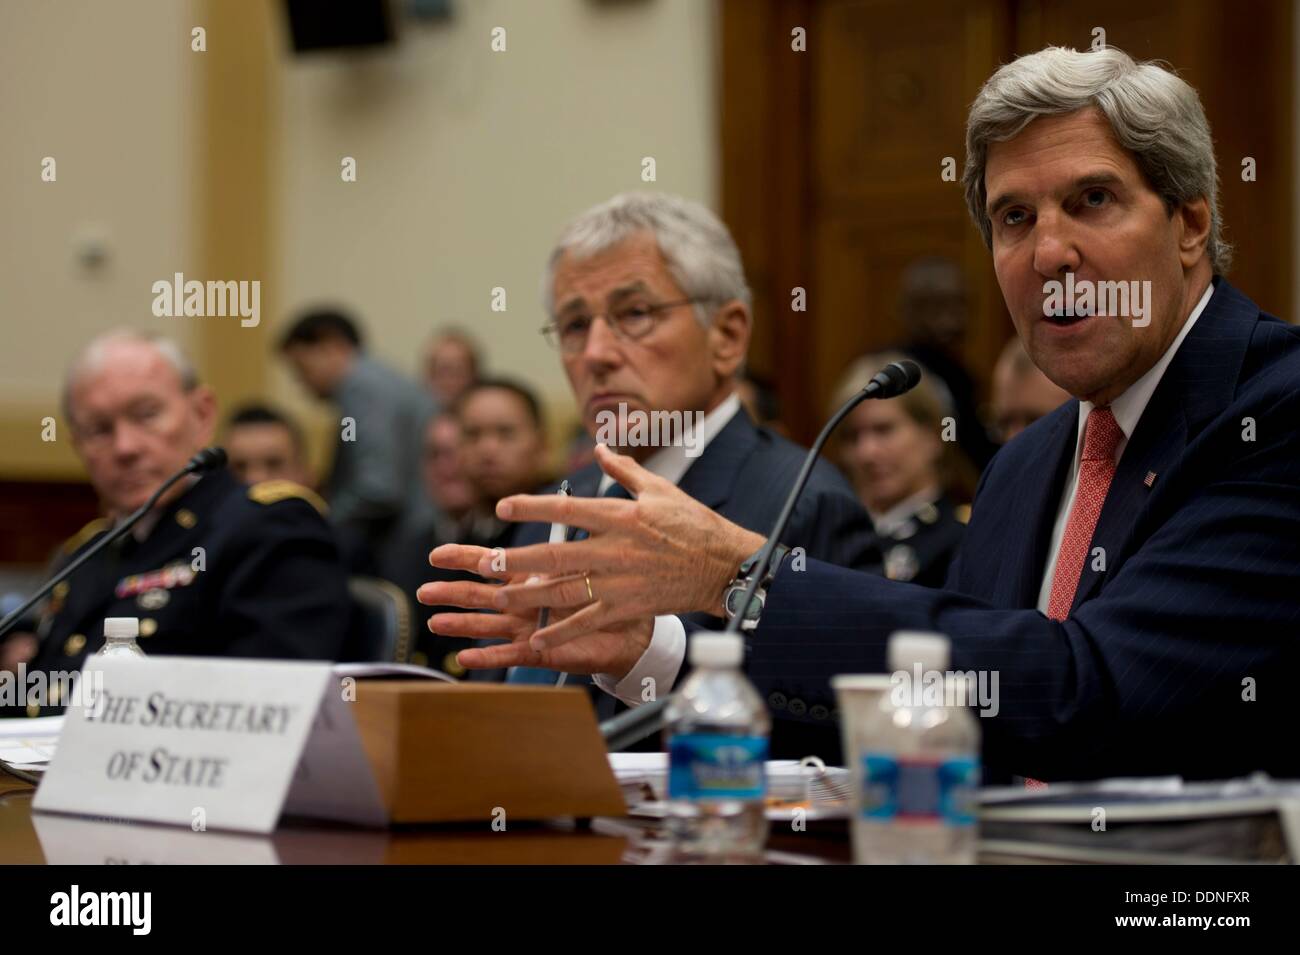 US Secretary of State John Kerry during a hearing on Syria before the House Foreign Affairs Committee September 4, 2013 in Washington DC. During the hearing, Kerry, Hagel and Chairman of the Joint Chiefs Gen. Martin Dempsey discussed possible military intervention in response to the use of chemical weapons by Syria on their own people. Stock Photo